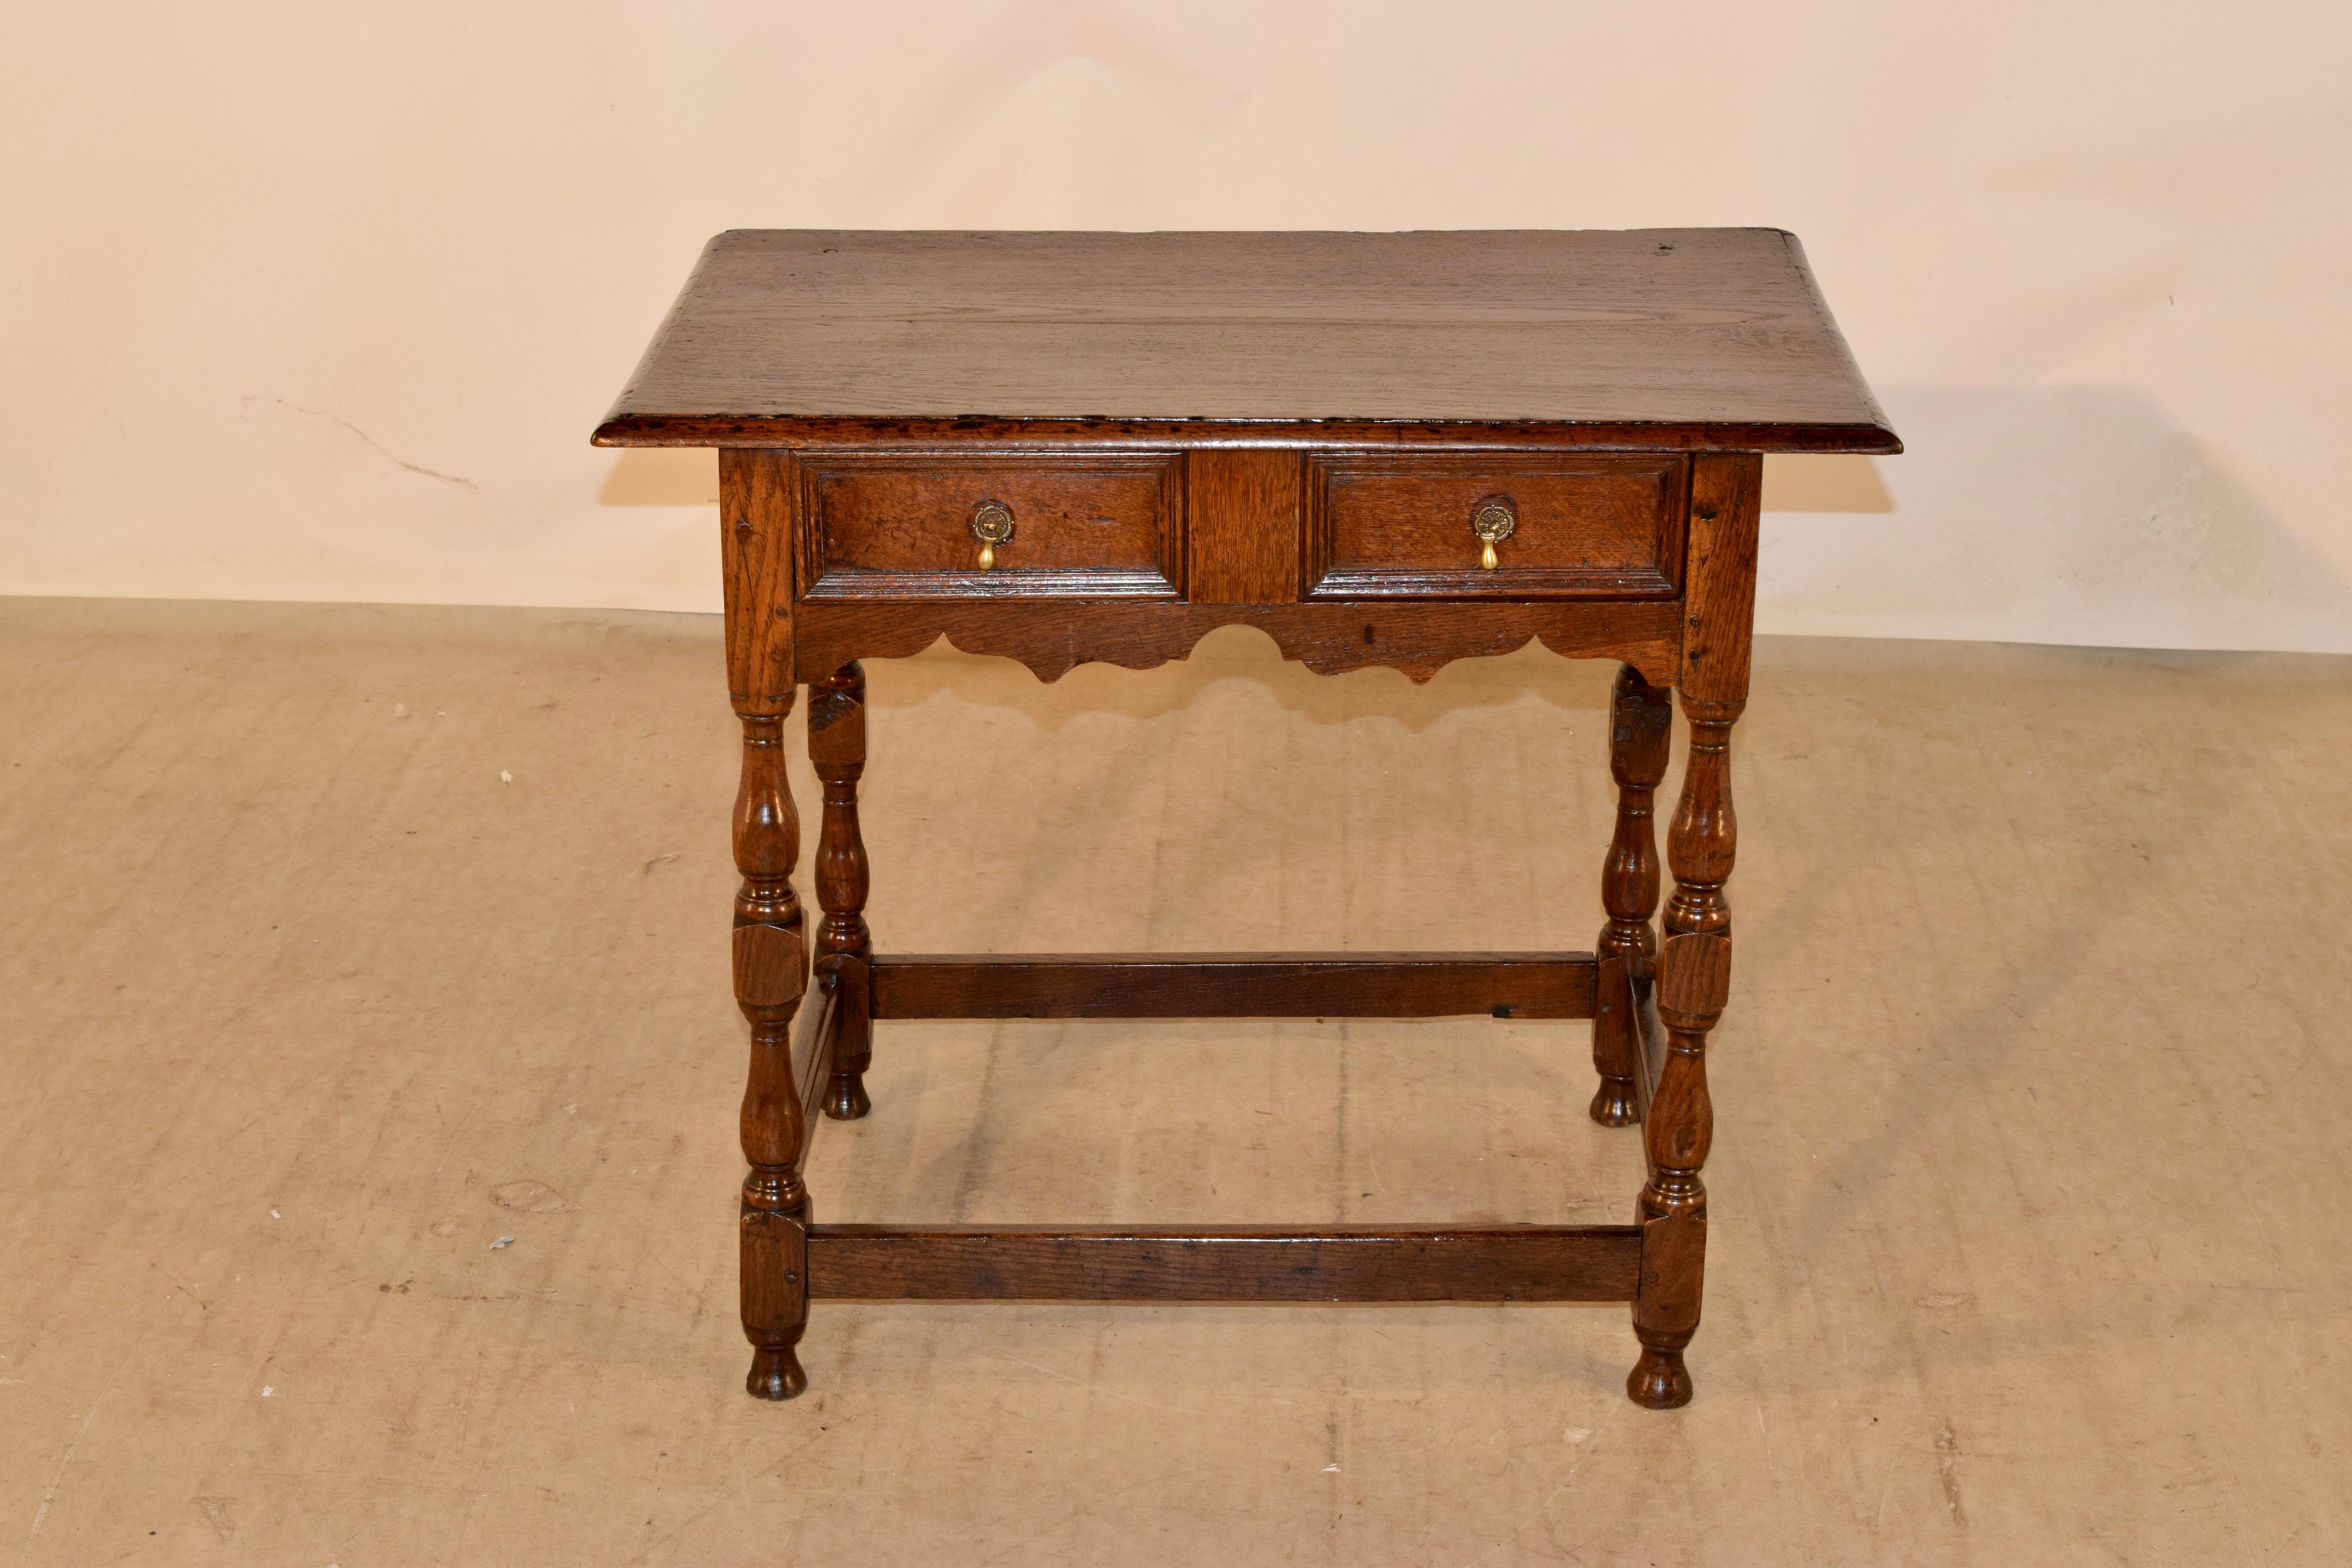 Late 17th century oak side table from England with a two board top that has a beveled edge around the top, following down to simple sides and a single drawer in the front with a lovely hand scalloped apron. the table is supported on hand turned